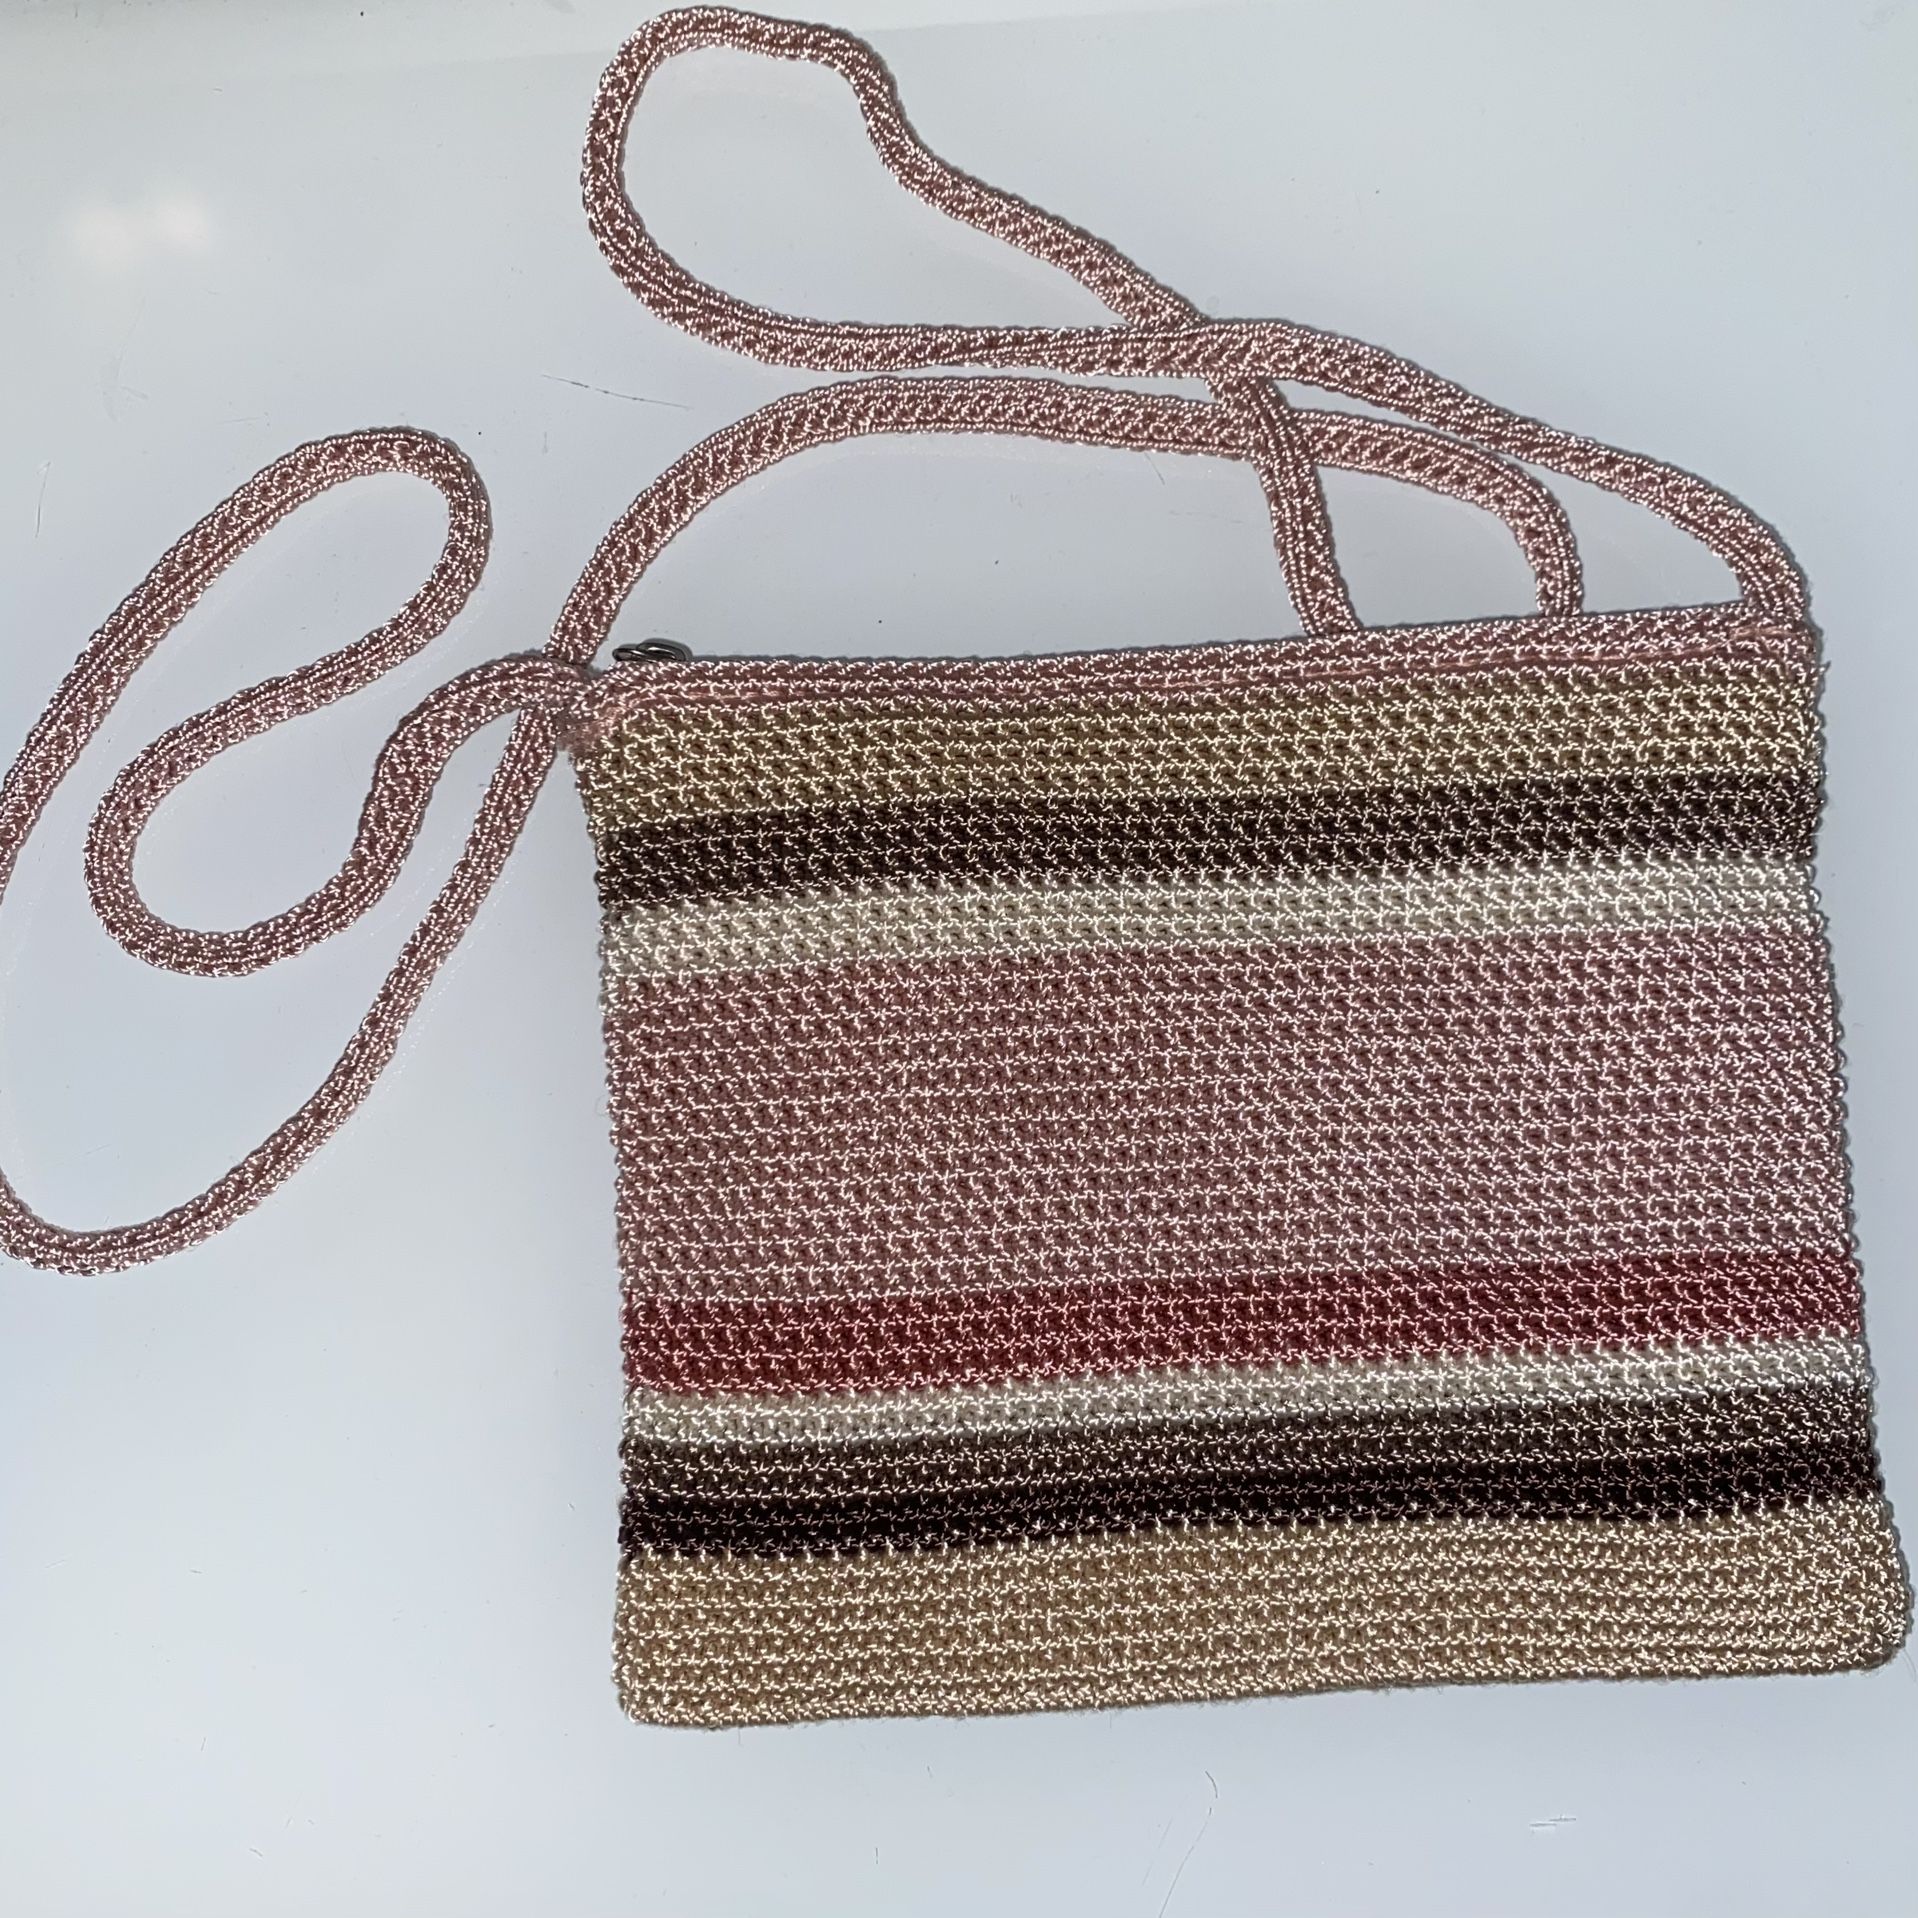 Small Purse Pouch Multicolor Pastel Pink and Brown Woven by The Sak with a small pocket inside with zipper closure. Material is really high quality